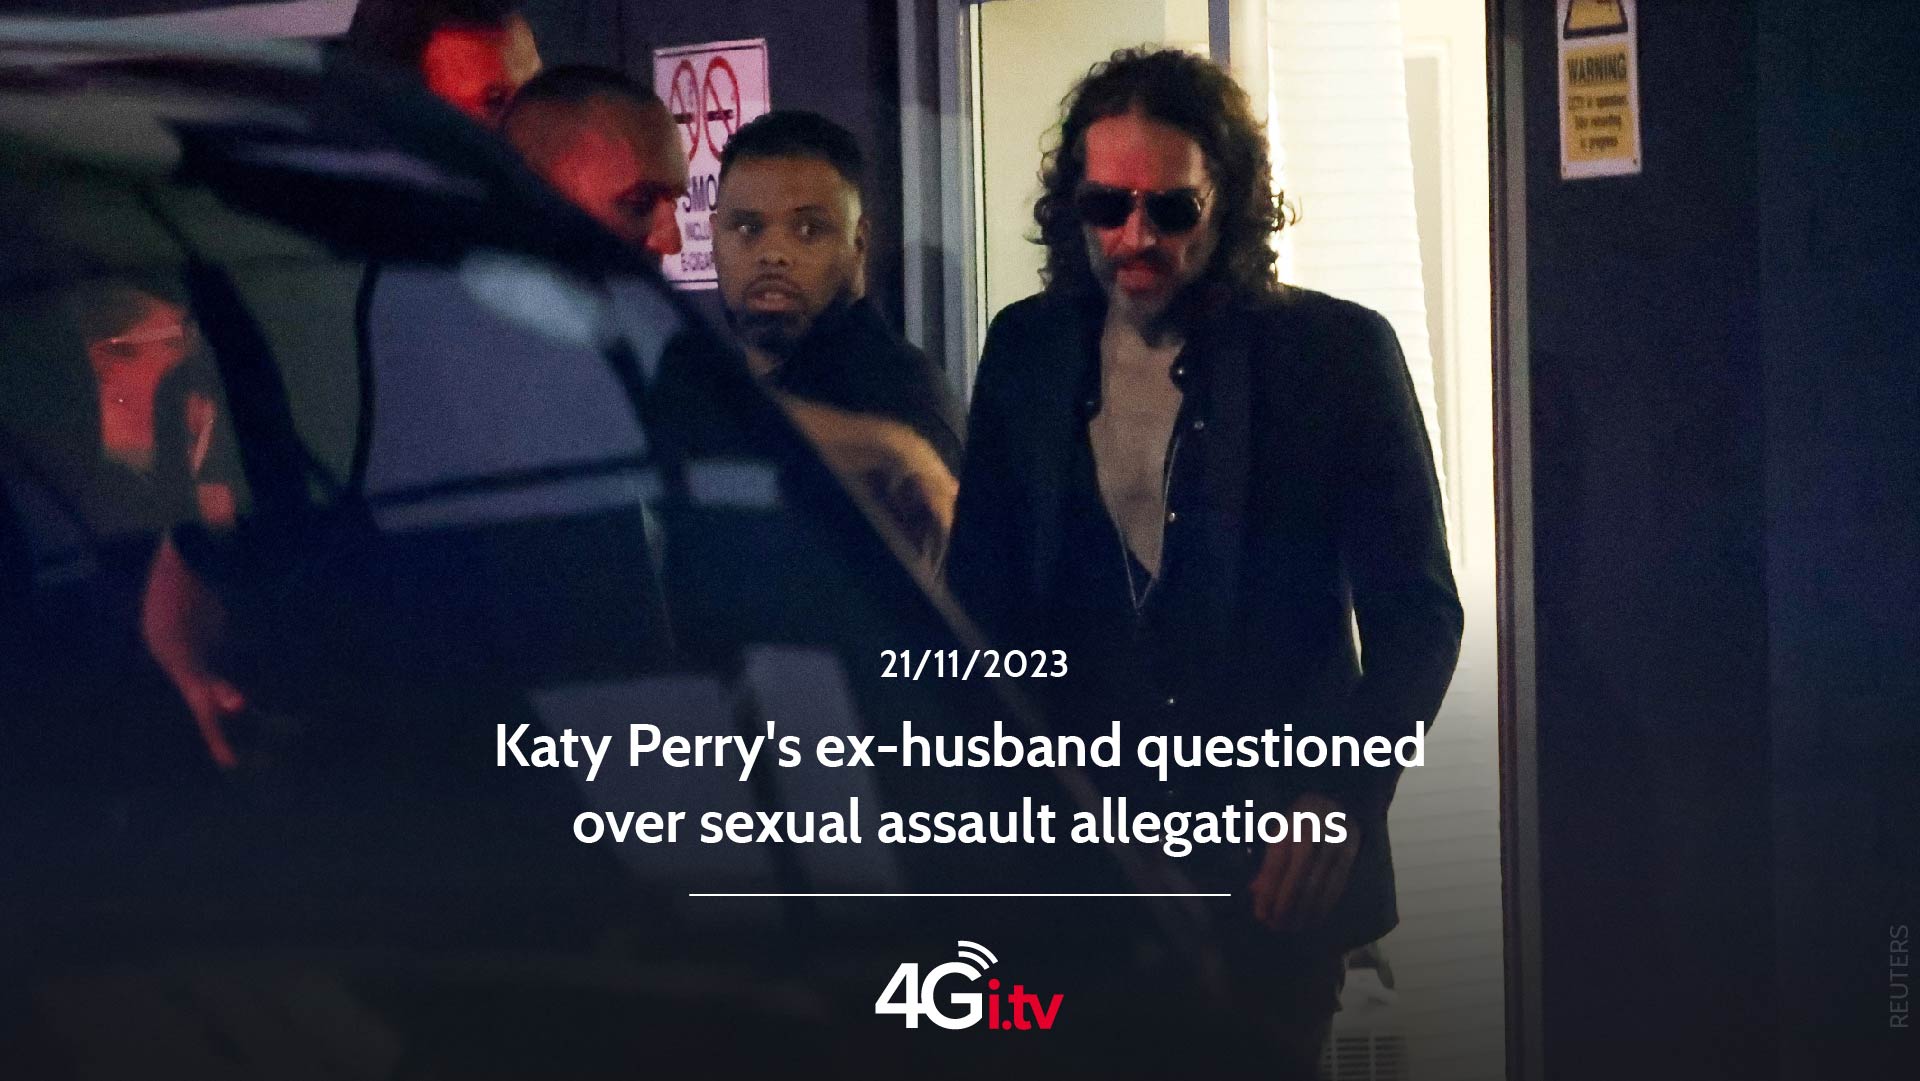 Подробнее о статье Katy Perry’s ex-husband questioned over sexual assault allegations